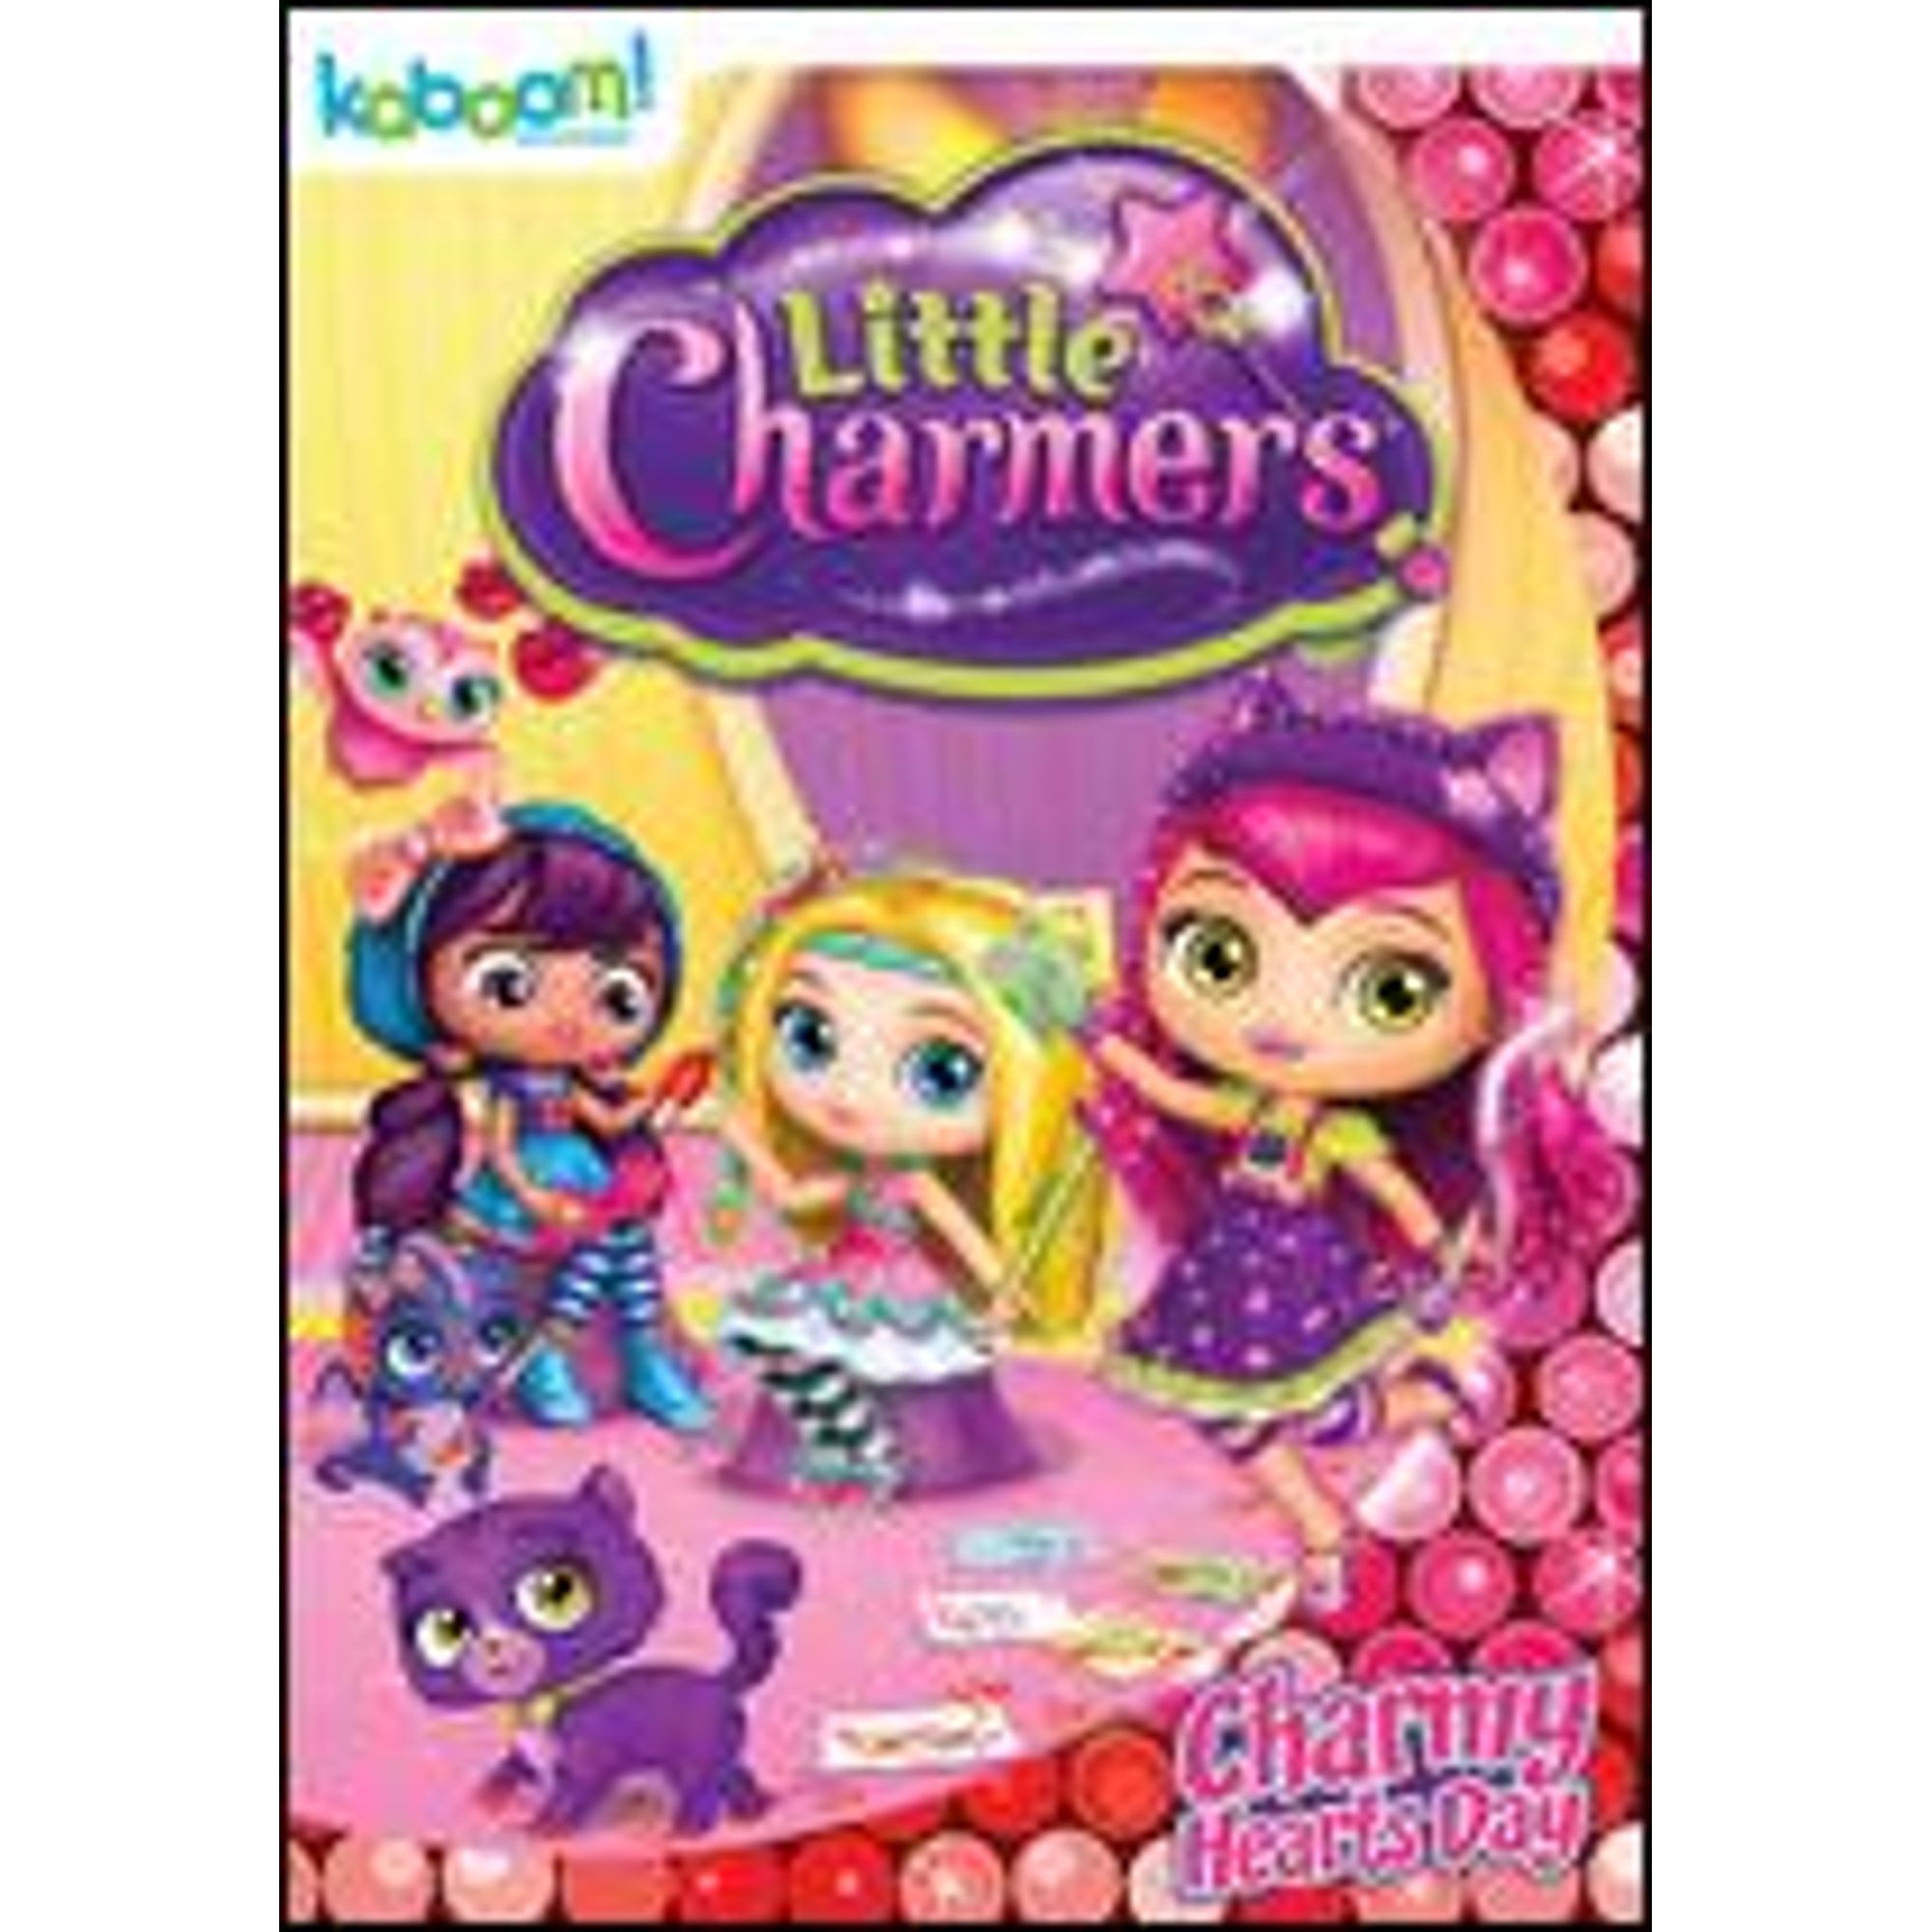 Pre-Owned Little Charmers: Charmy Hearts Day (DVD 0625828644085 ...